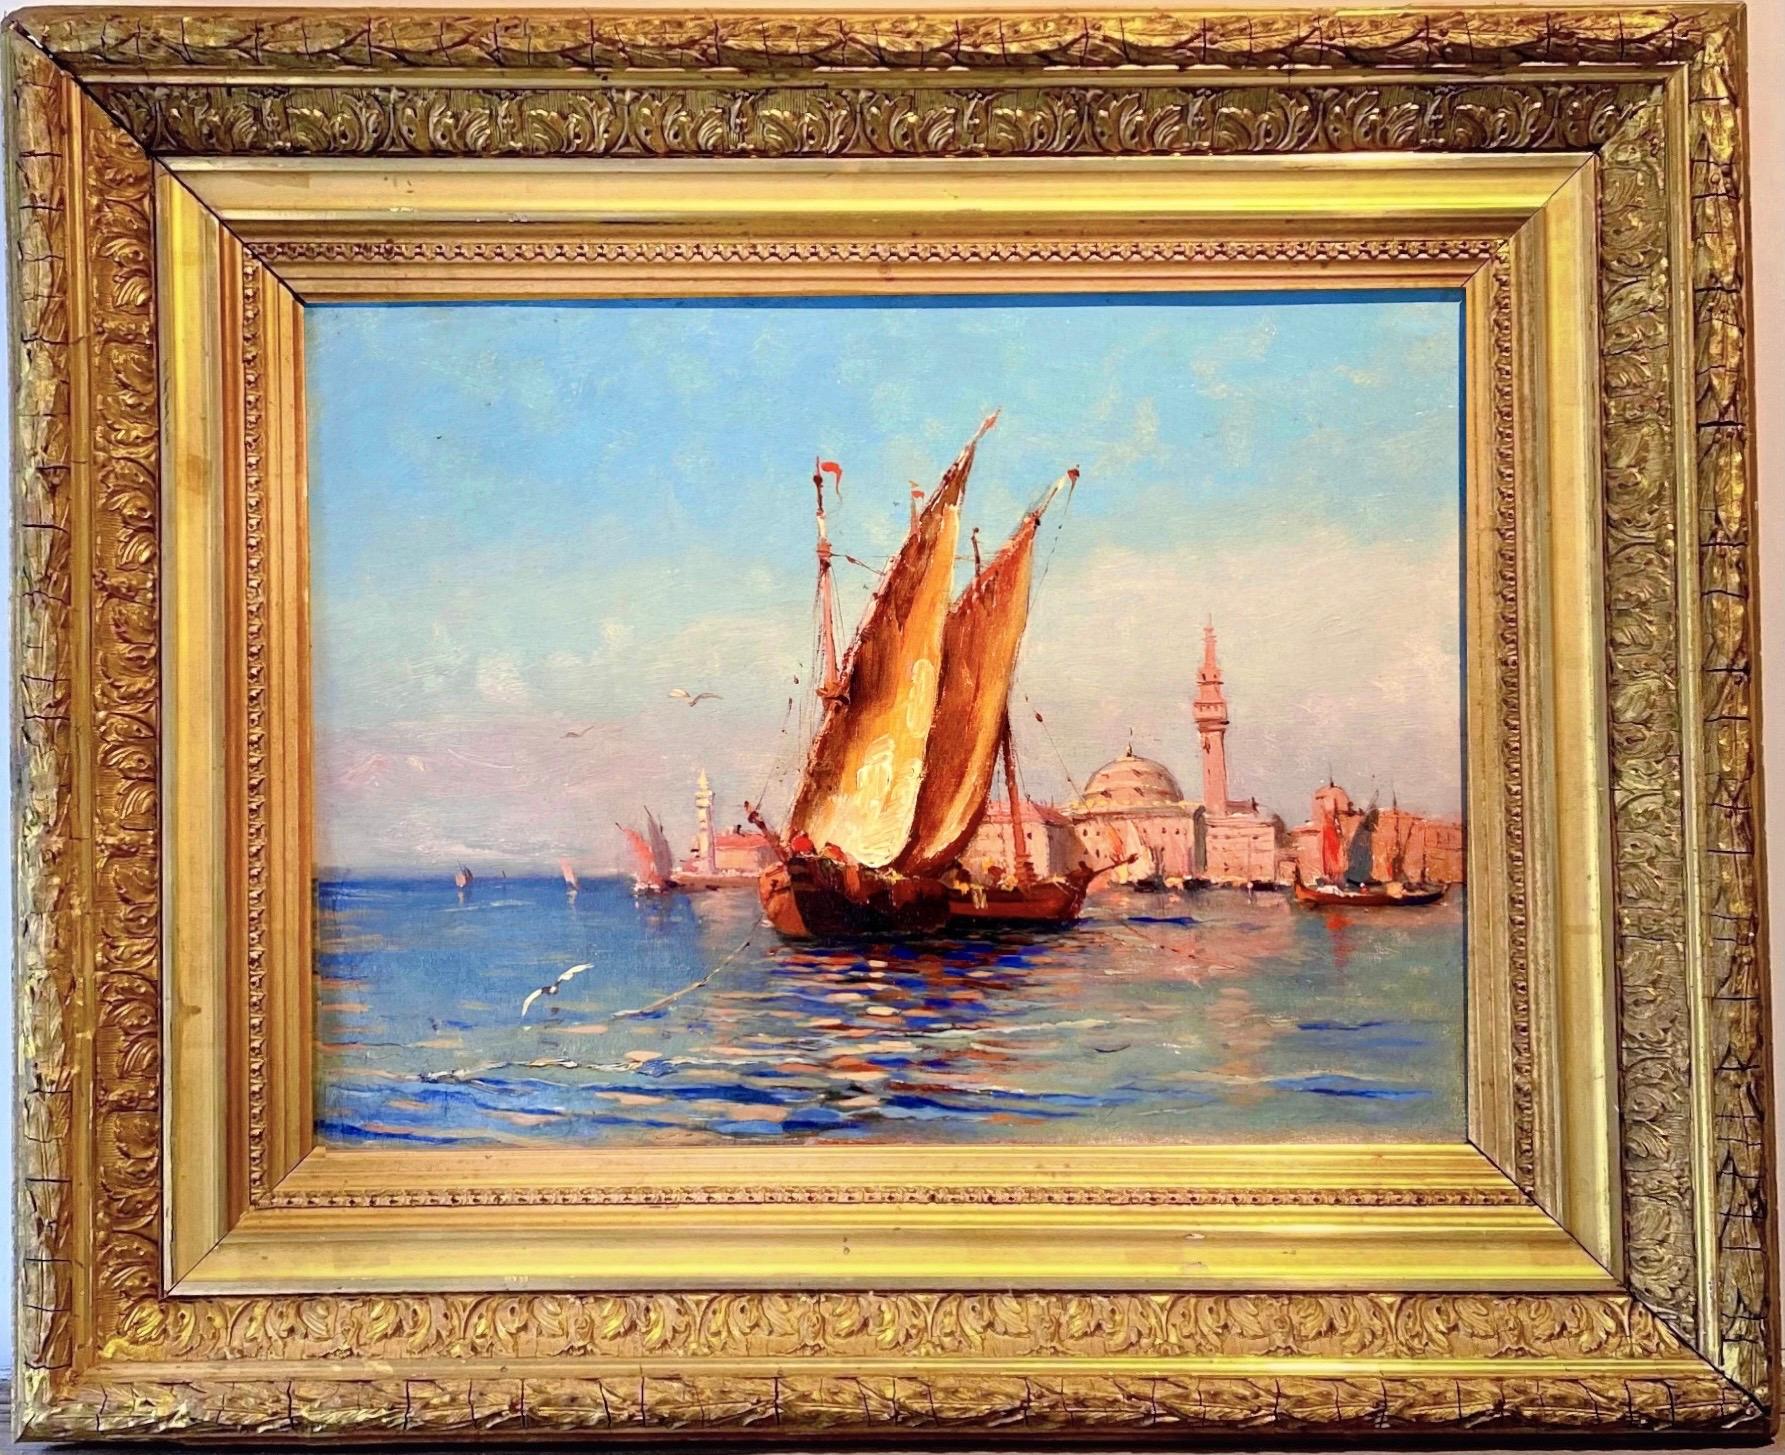 Felix Ziem Landscape Painting - 19th century French impressionist painting - View of Venice - Cityscape Boat